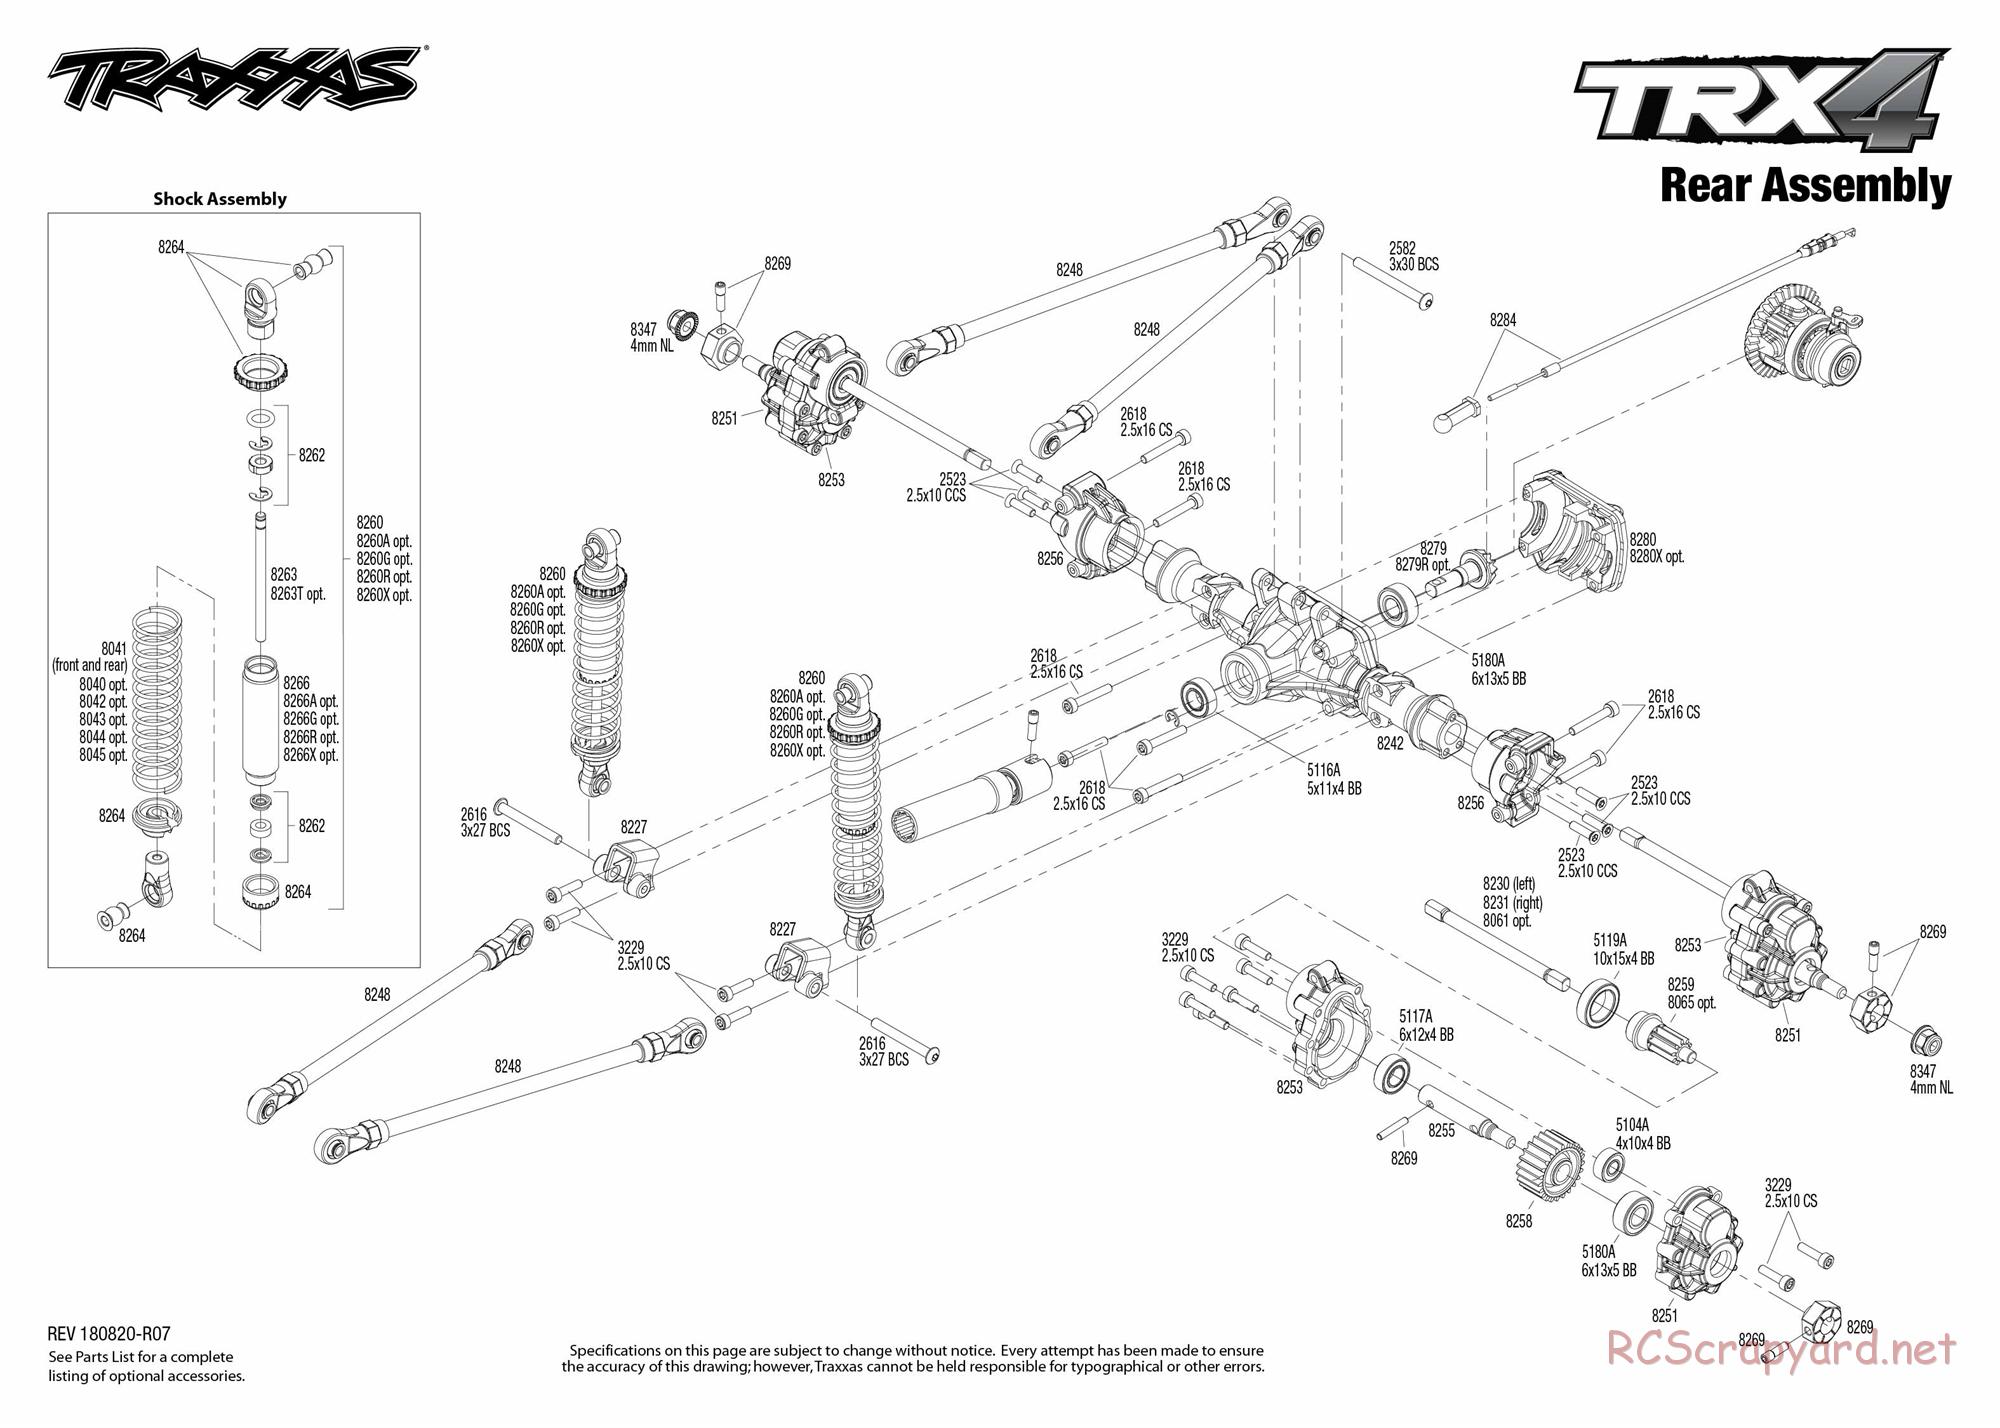 Traxxas - TRX-4 Chassis (2018) - Exploded Views - Page 4